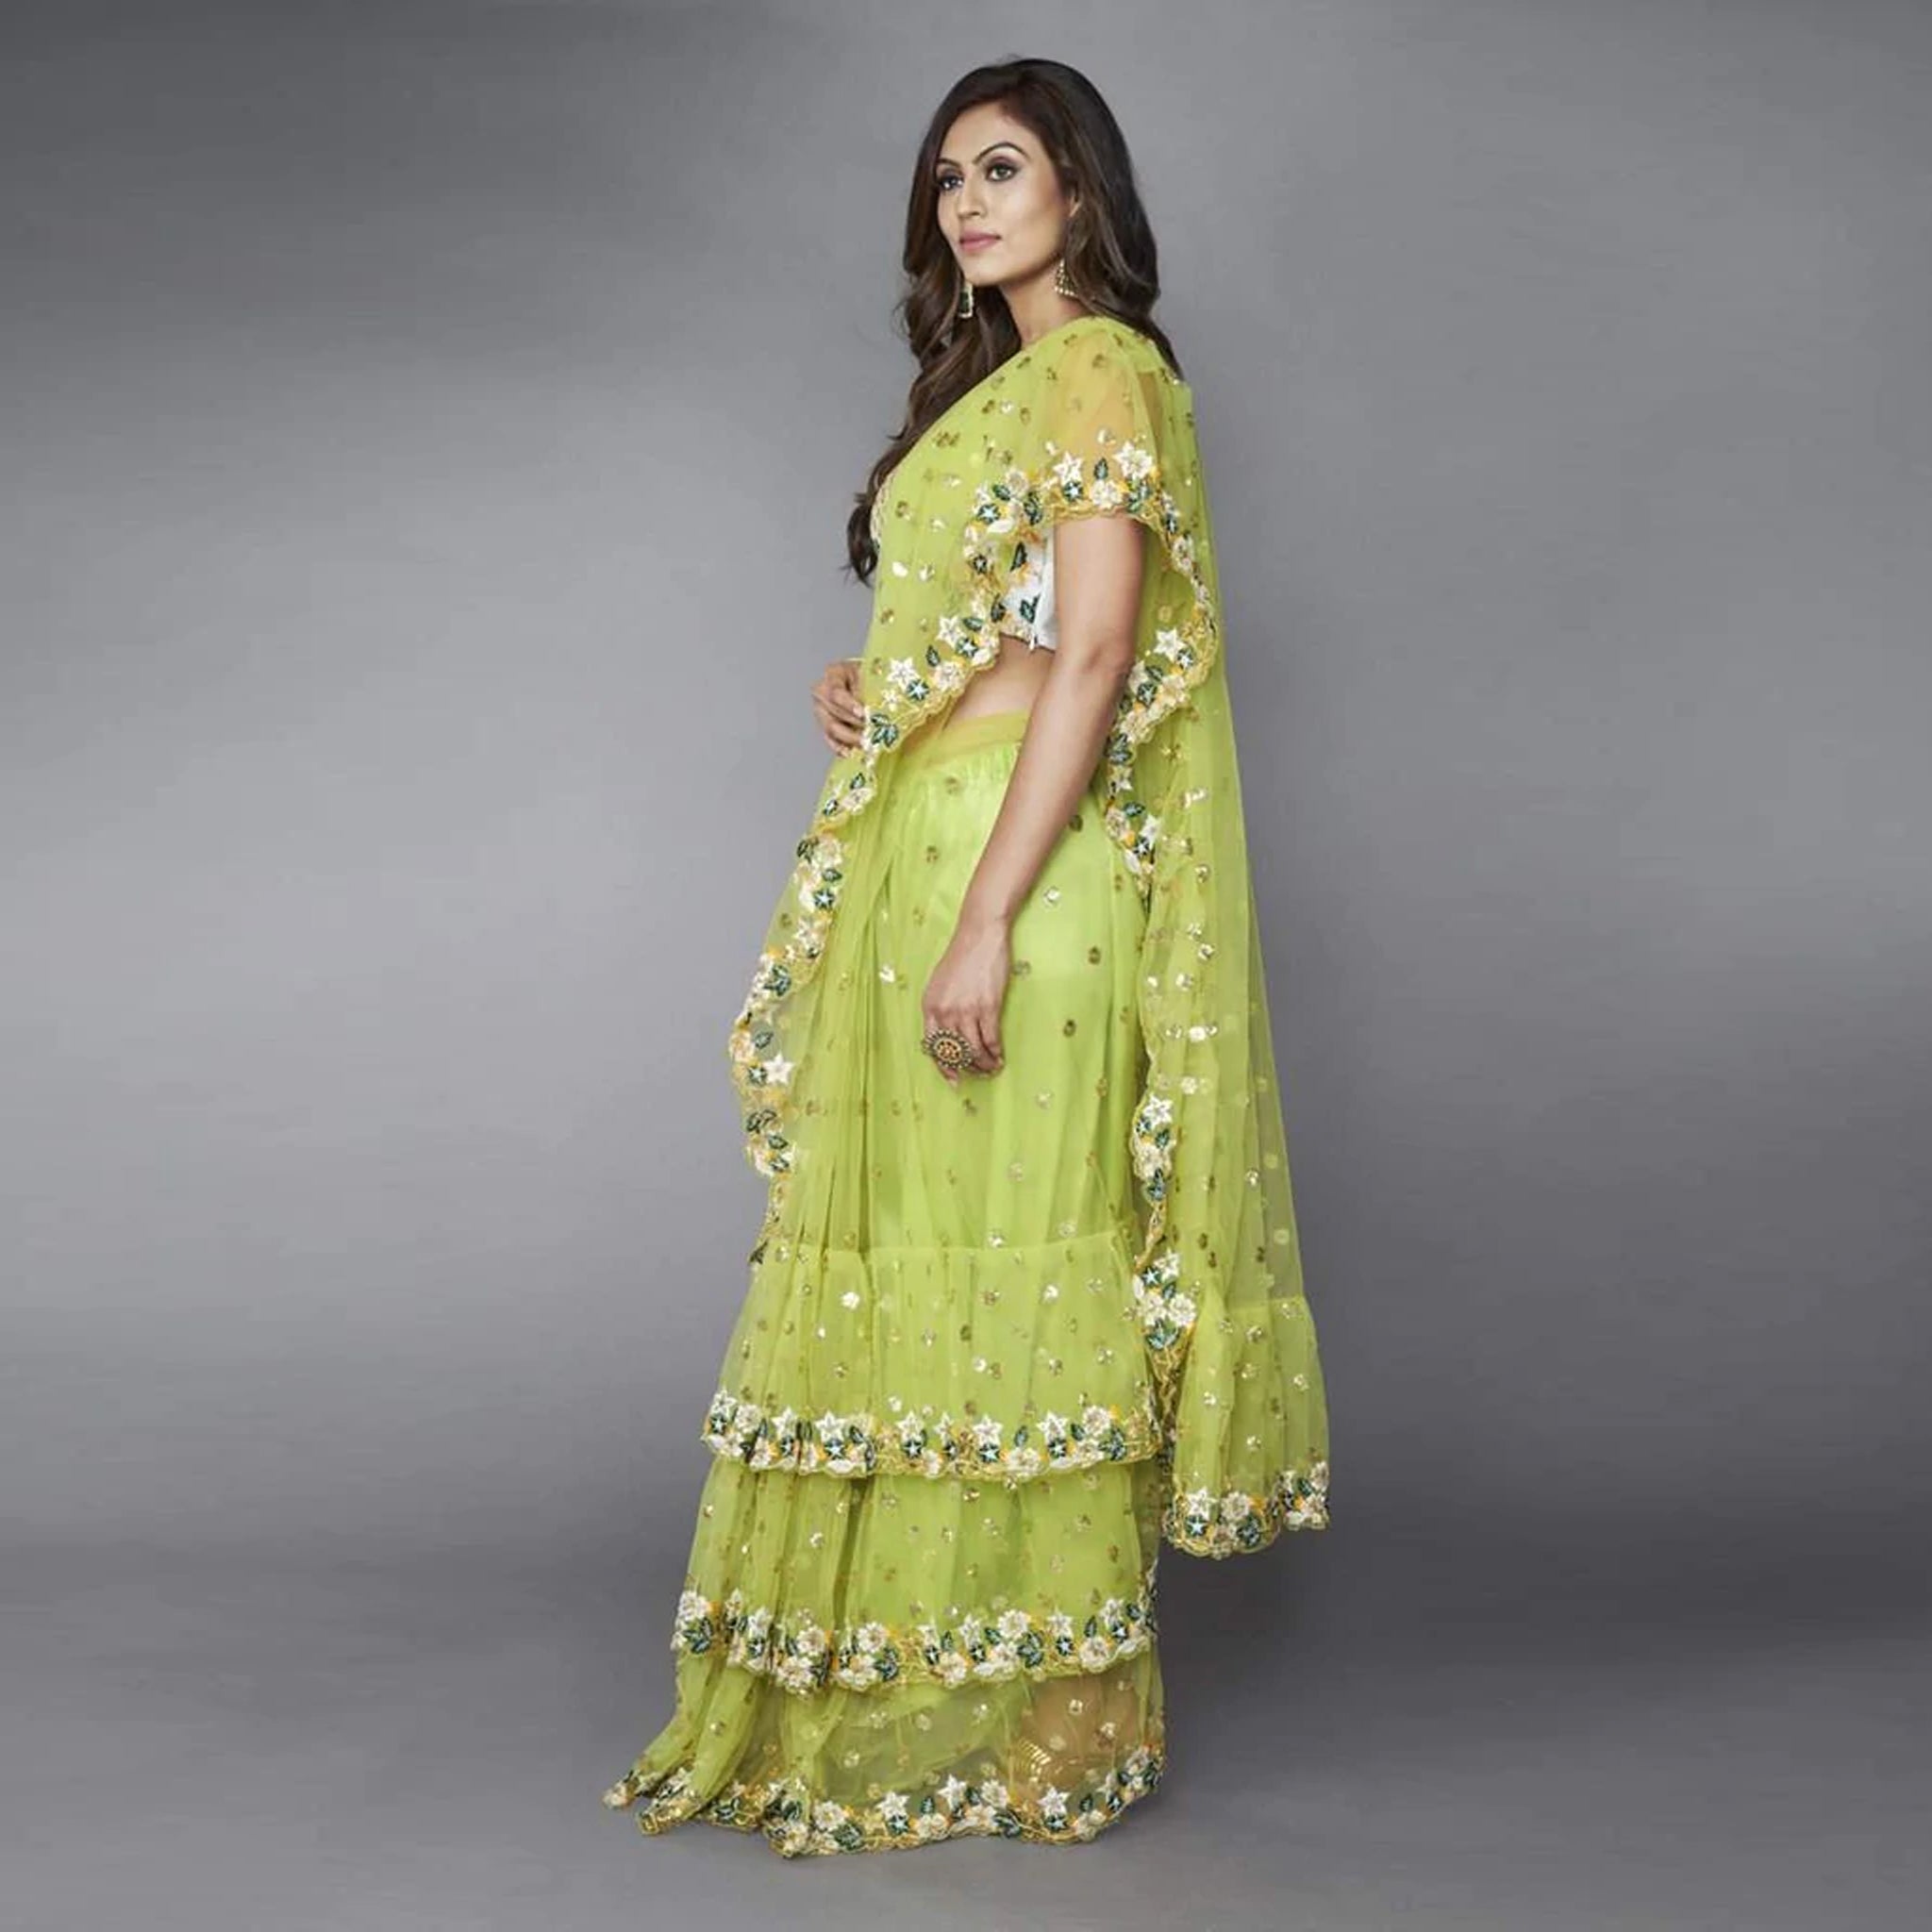 Green Ruffle Saree in Soft Net Fabrics with Embroidery Work - Colorful Saree